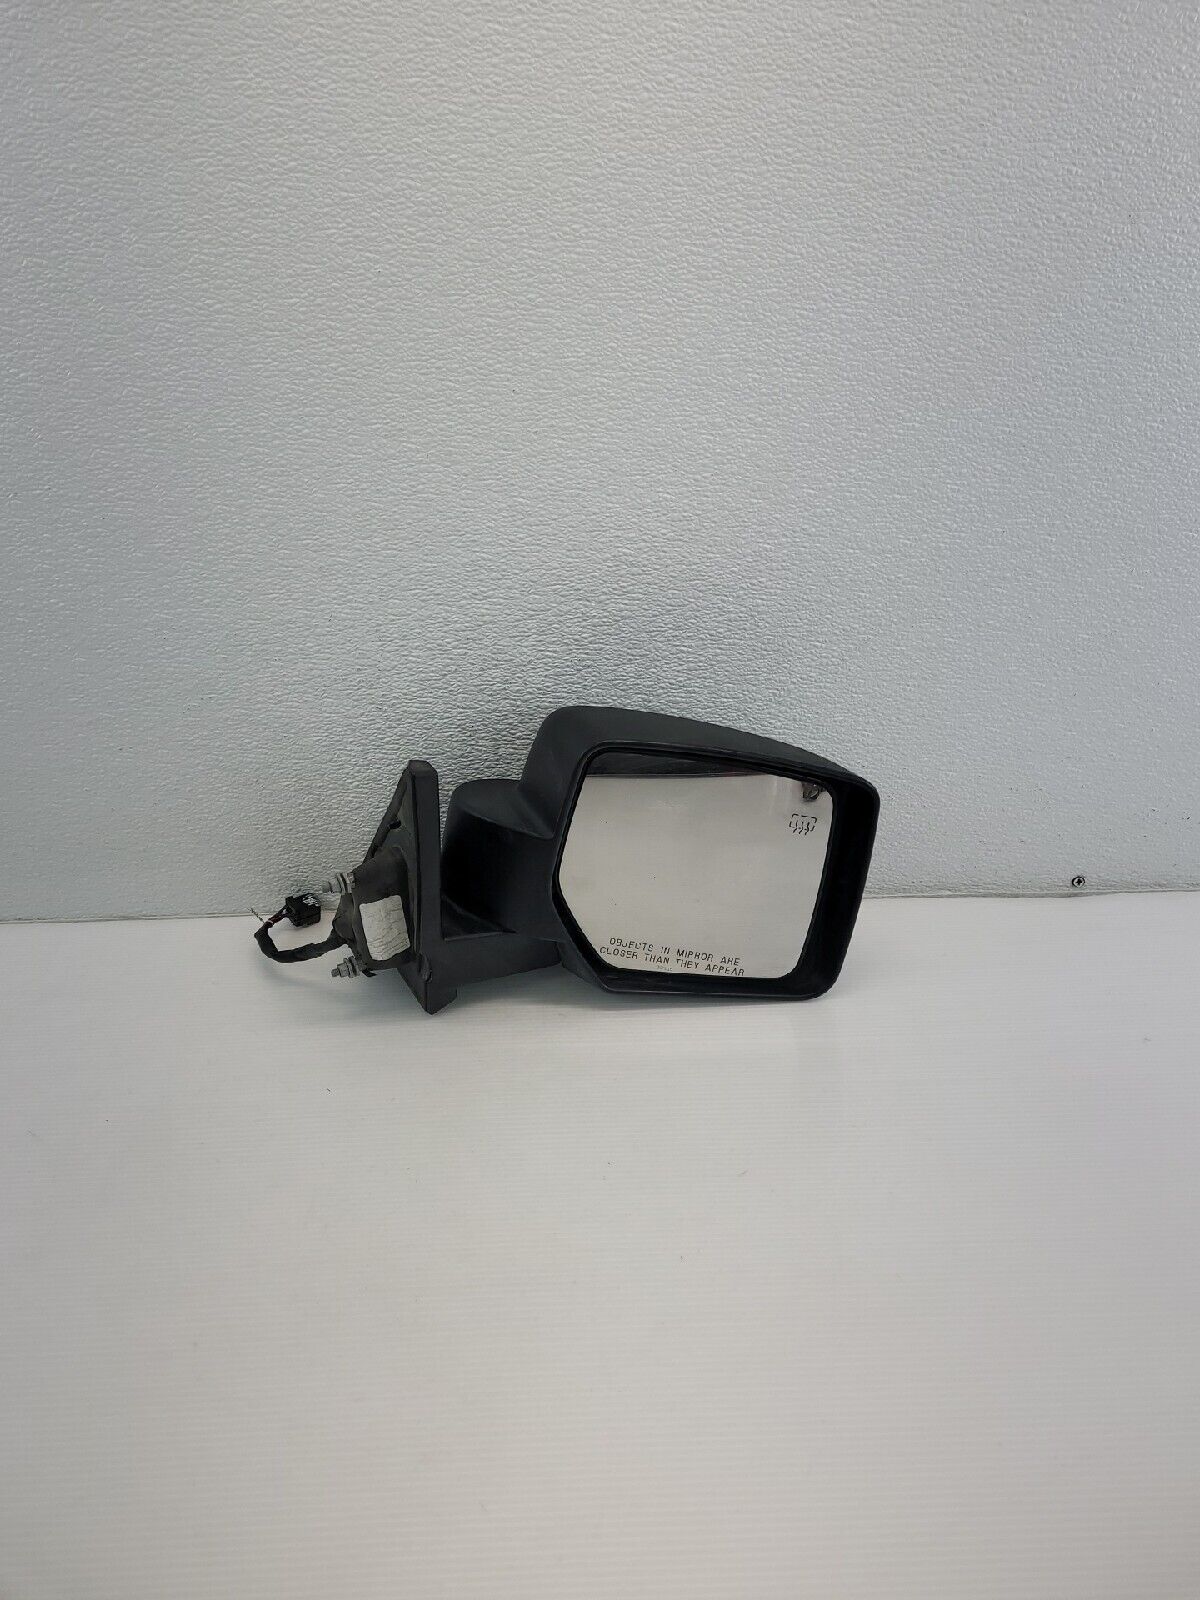 2007 - 2013 JEEP COMPASS RIGHT PASSANGER SIDE DOOR POWER MIRROR HEATED OEM 07-13